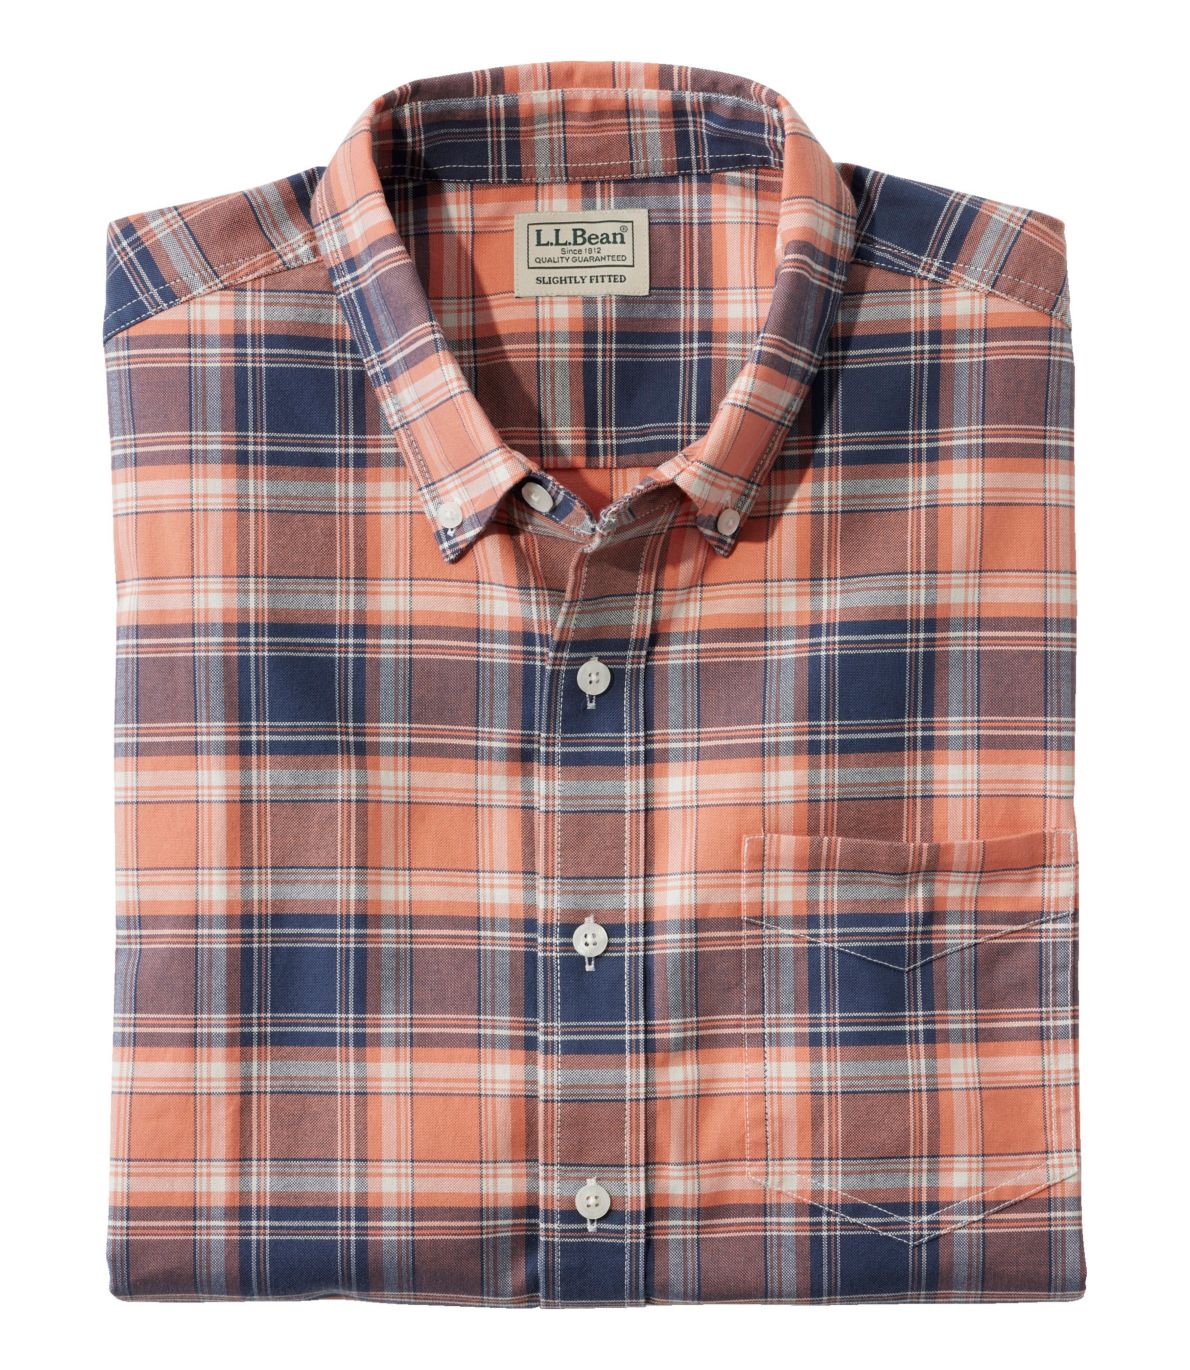 Men's Comfort Stretch Oxford, Slightly Fitted Untucked Fit, Short-Sleeve, Plaid